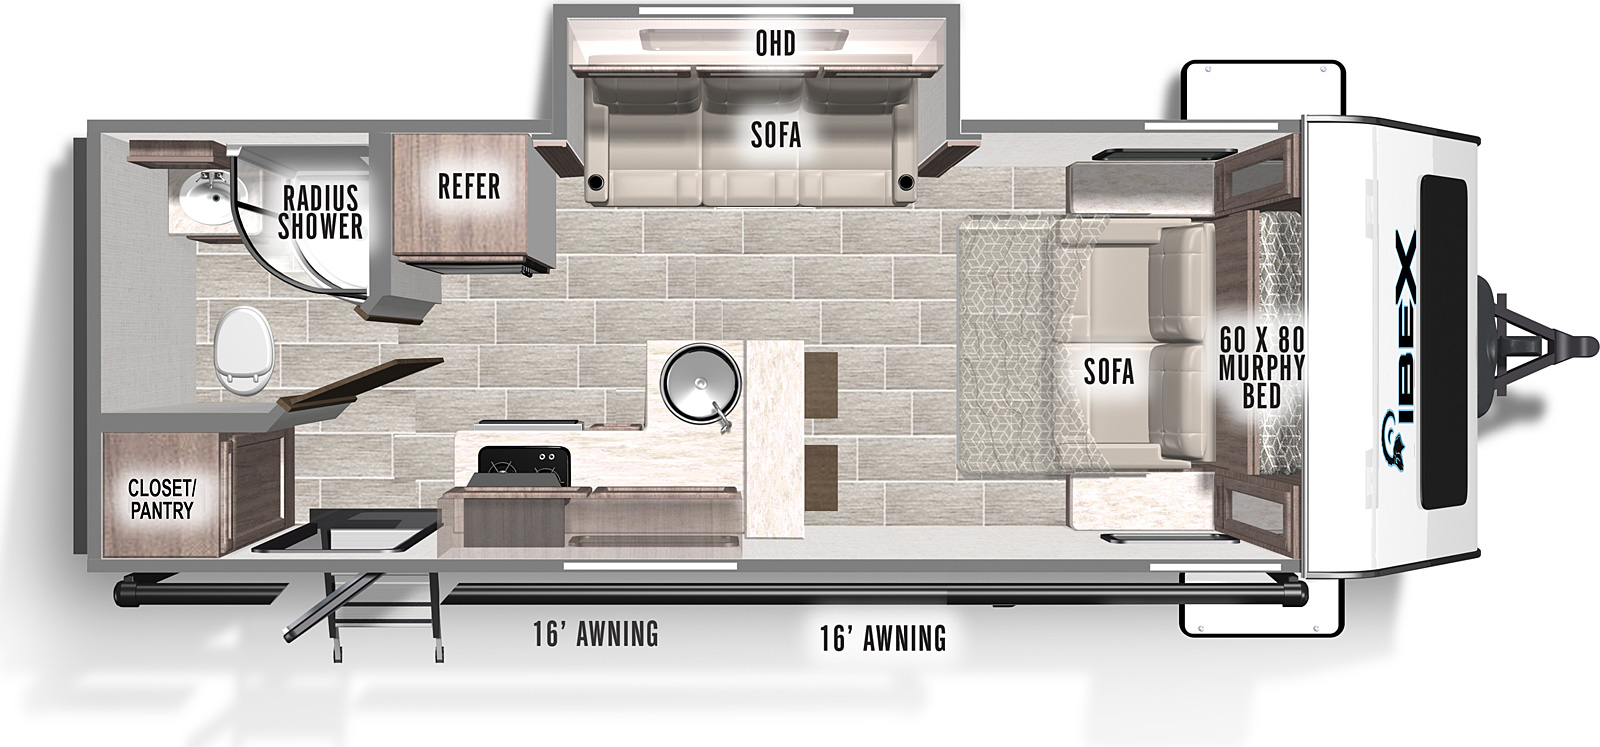 The 19MSB has one slideout and one entry. Exterior features include a 16 foot awning. Interior layout front to back: murphy bed and sofa; off-door side slideout with sofa and overhead cabinets; peninsula kitchen counter with bar stools and sink that wraps around to door side kitchen; off-door side refrigerator; rear door side closet/pantry and entry; rear off-door side full bathroom with radius shower.